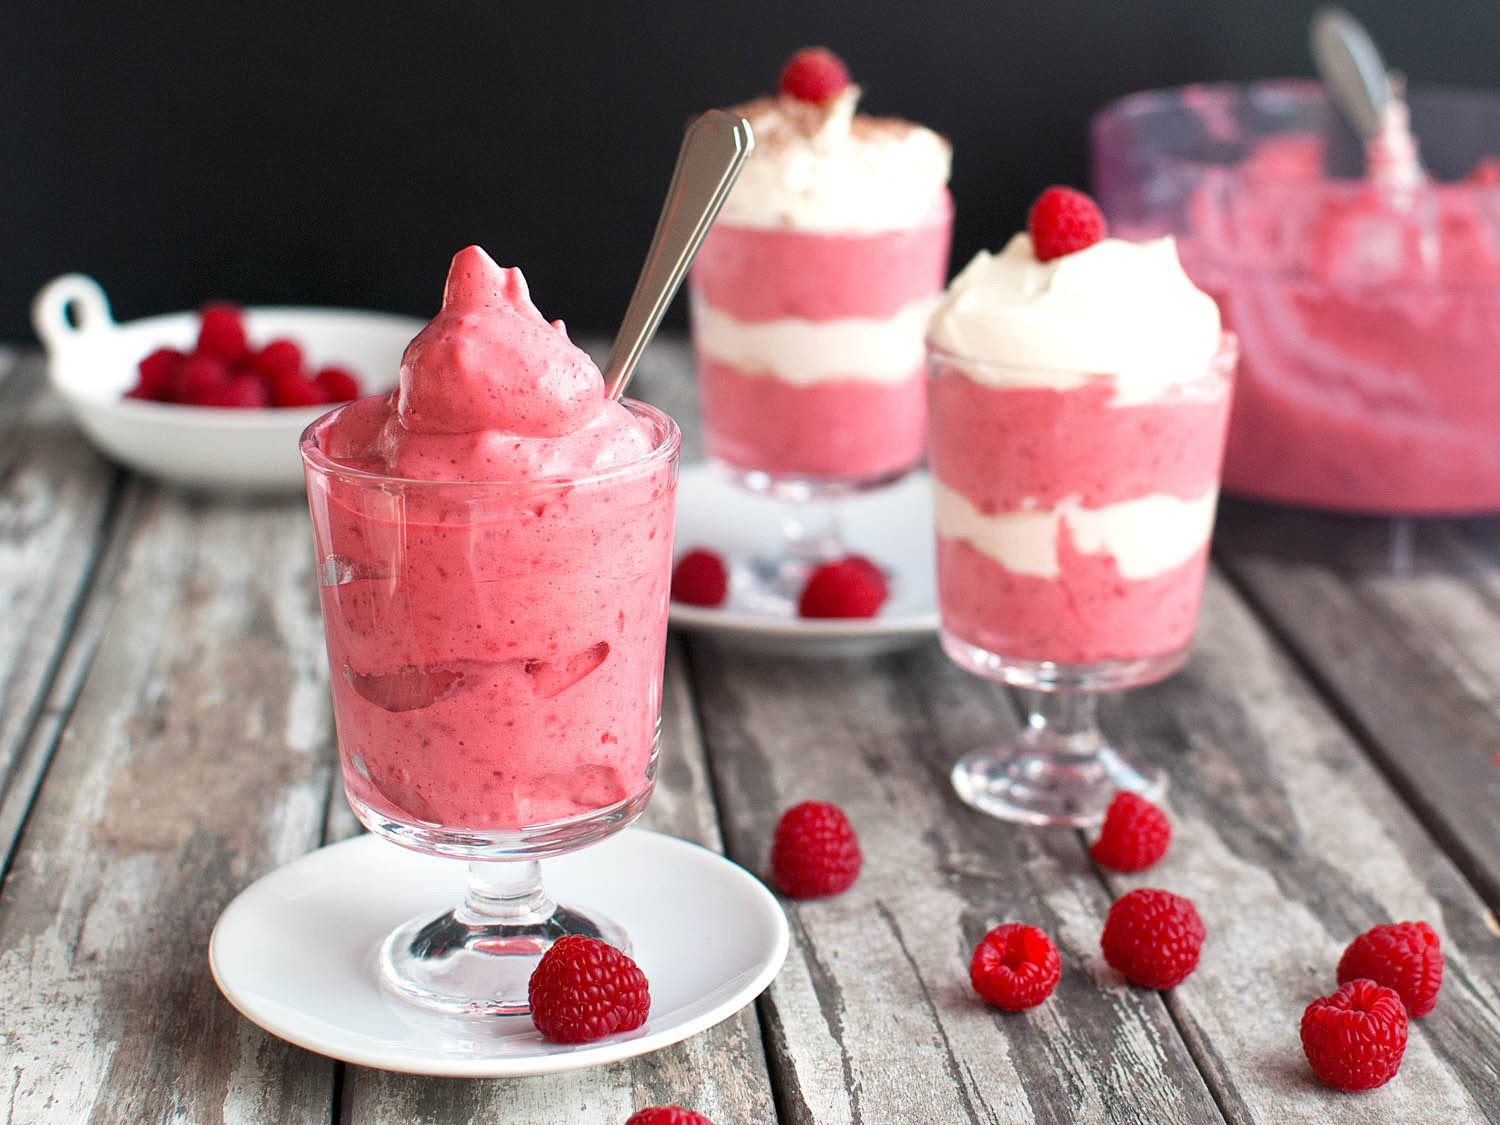 Easy To Make Healthy Desserts
 Light and Easy 5 Minute Fruit Mousse Recipe